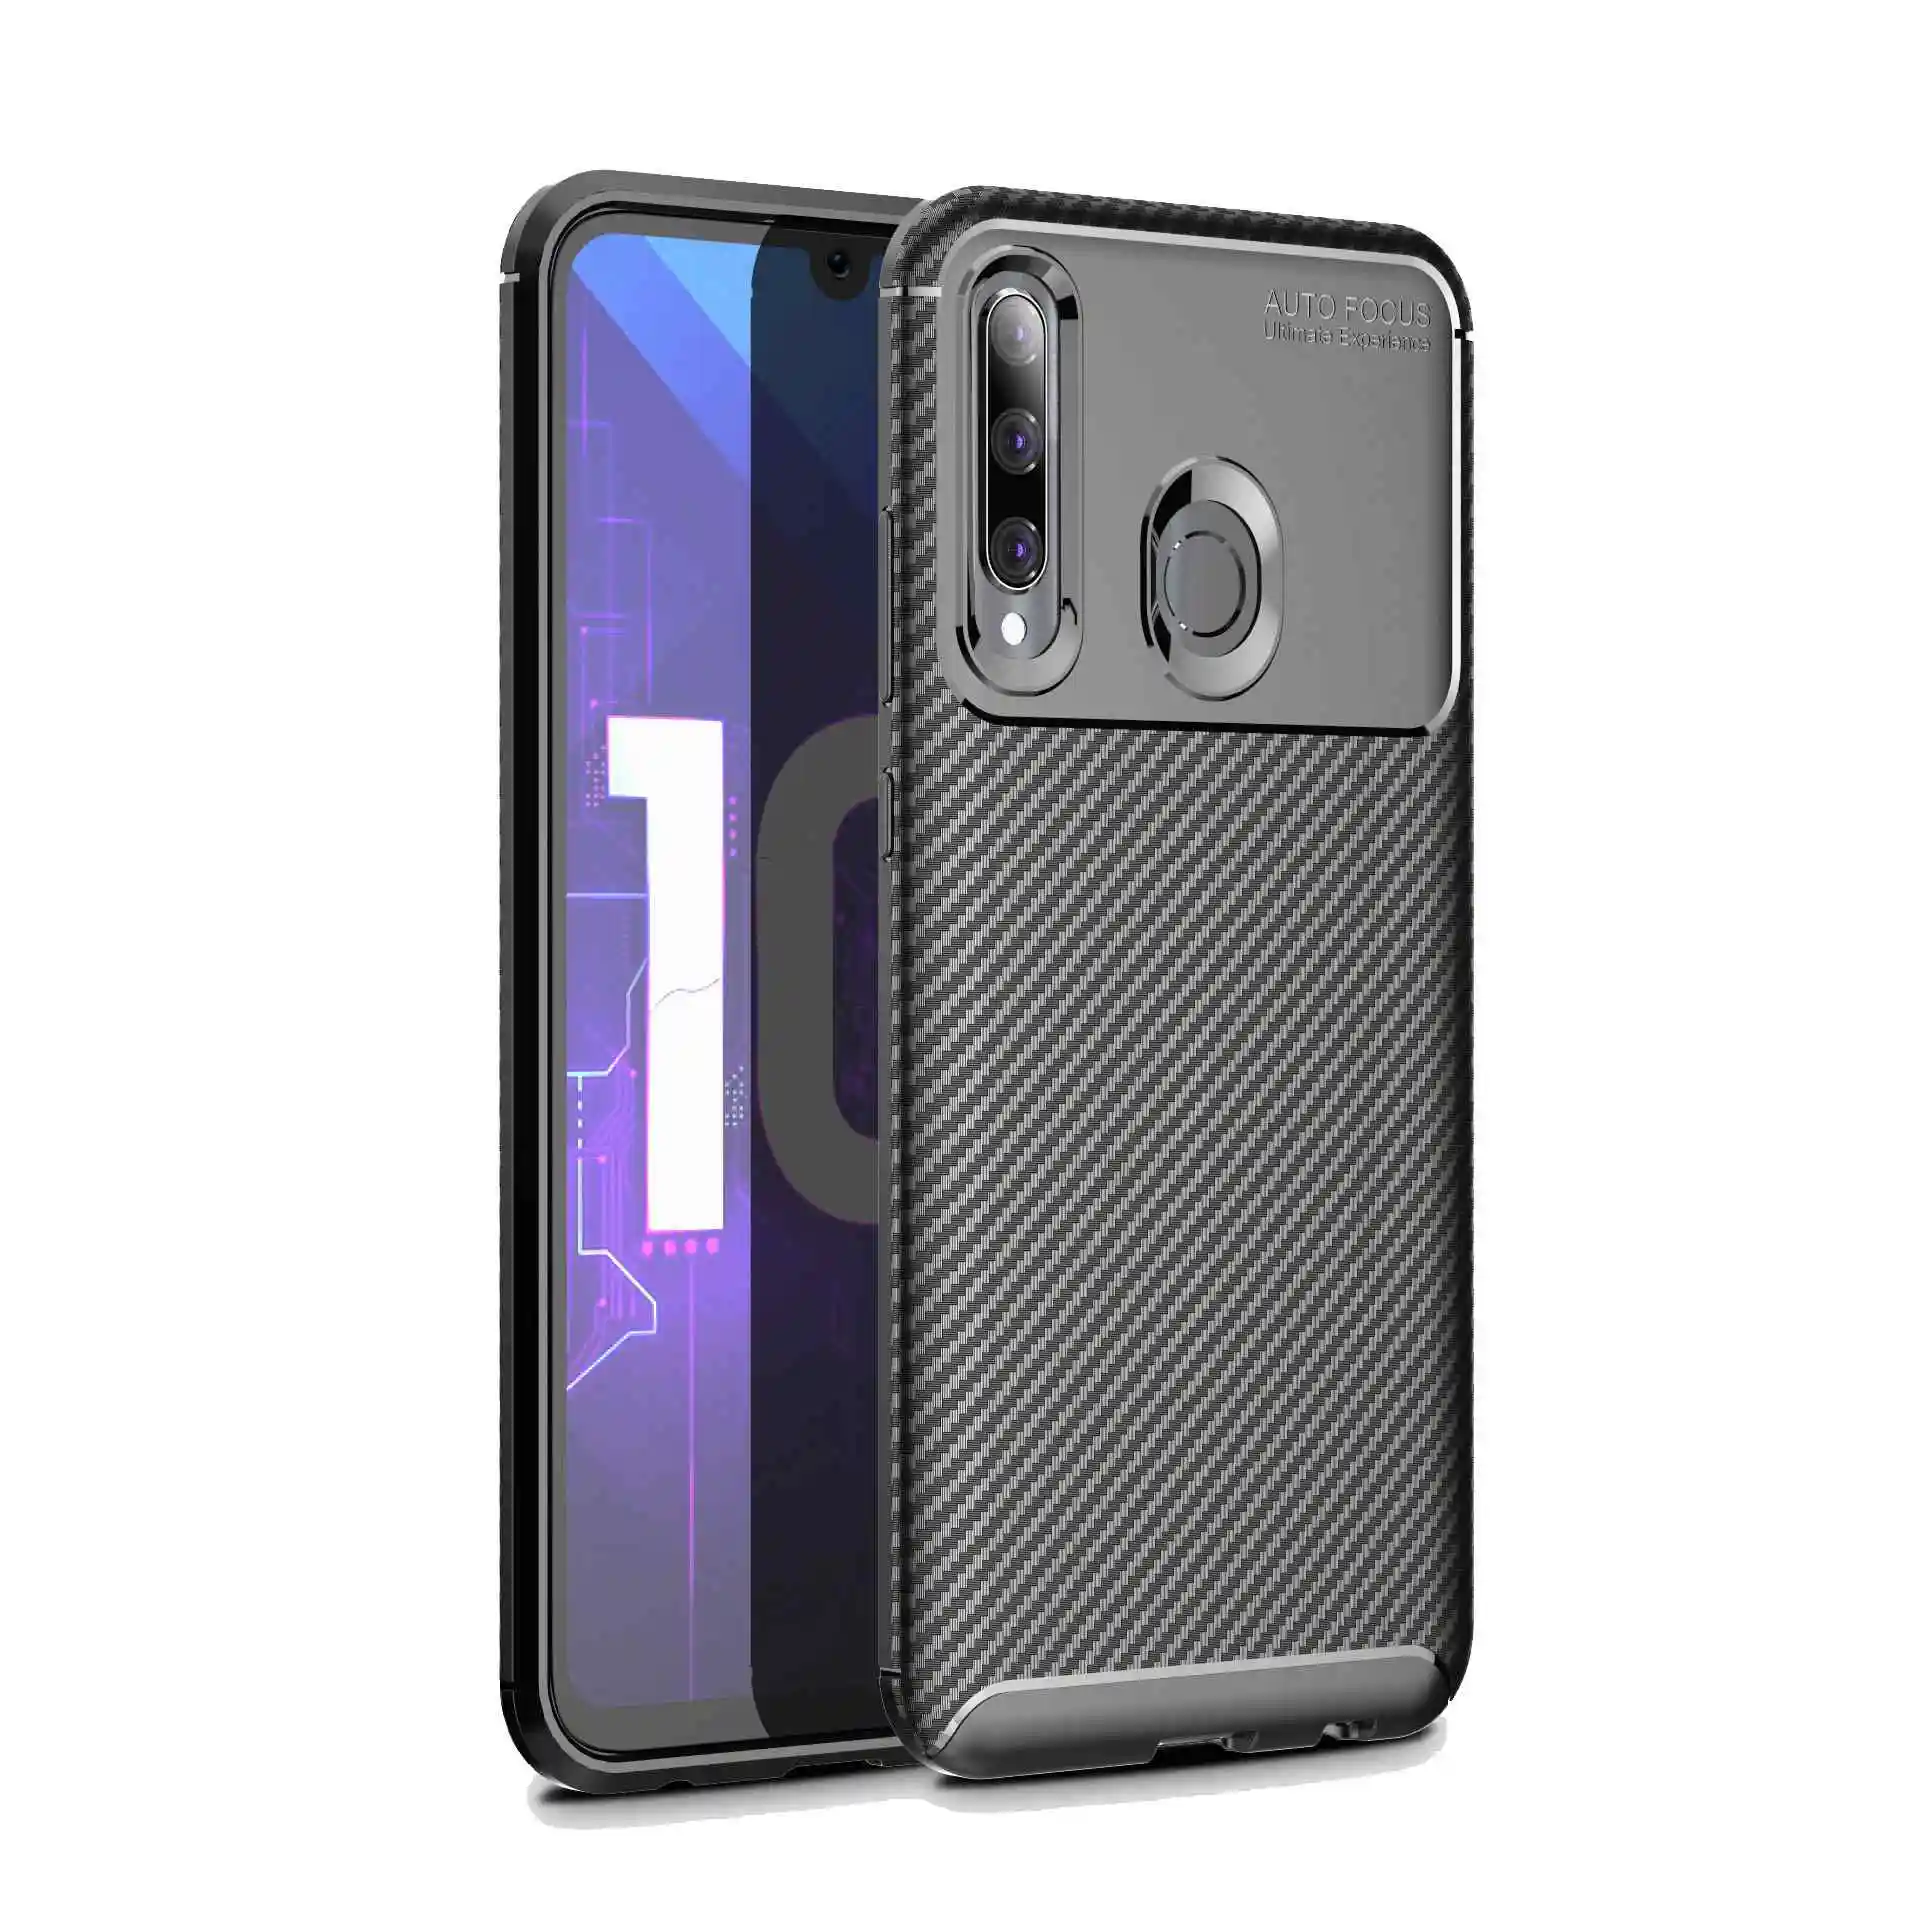 Slim Armor Case For Huawei Honor 10I New Trend Hot Selling Anti Shock Carbon Fiber Armor Soft TPU Smartphone Back Cover